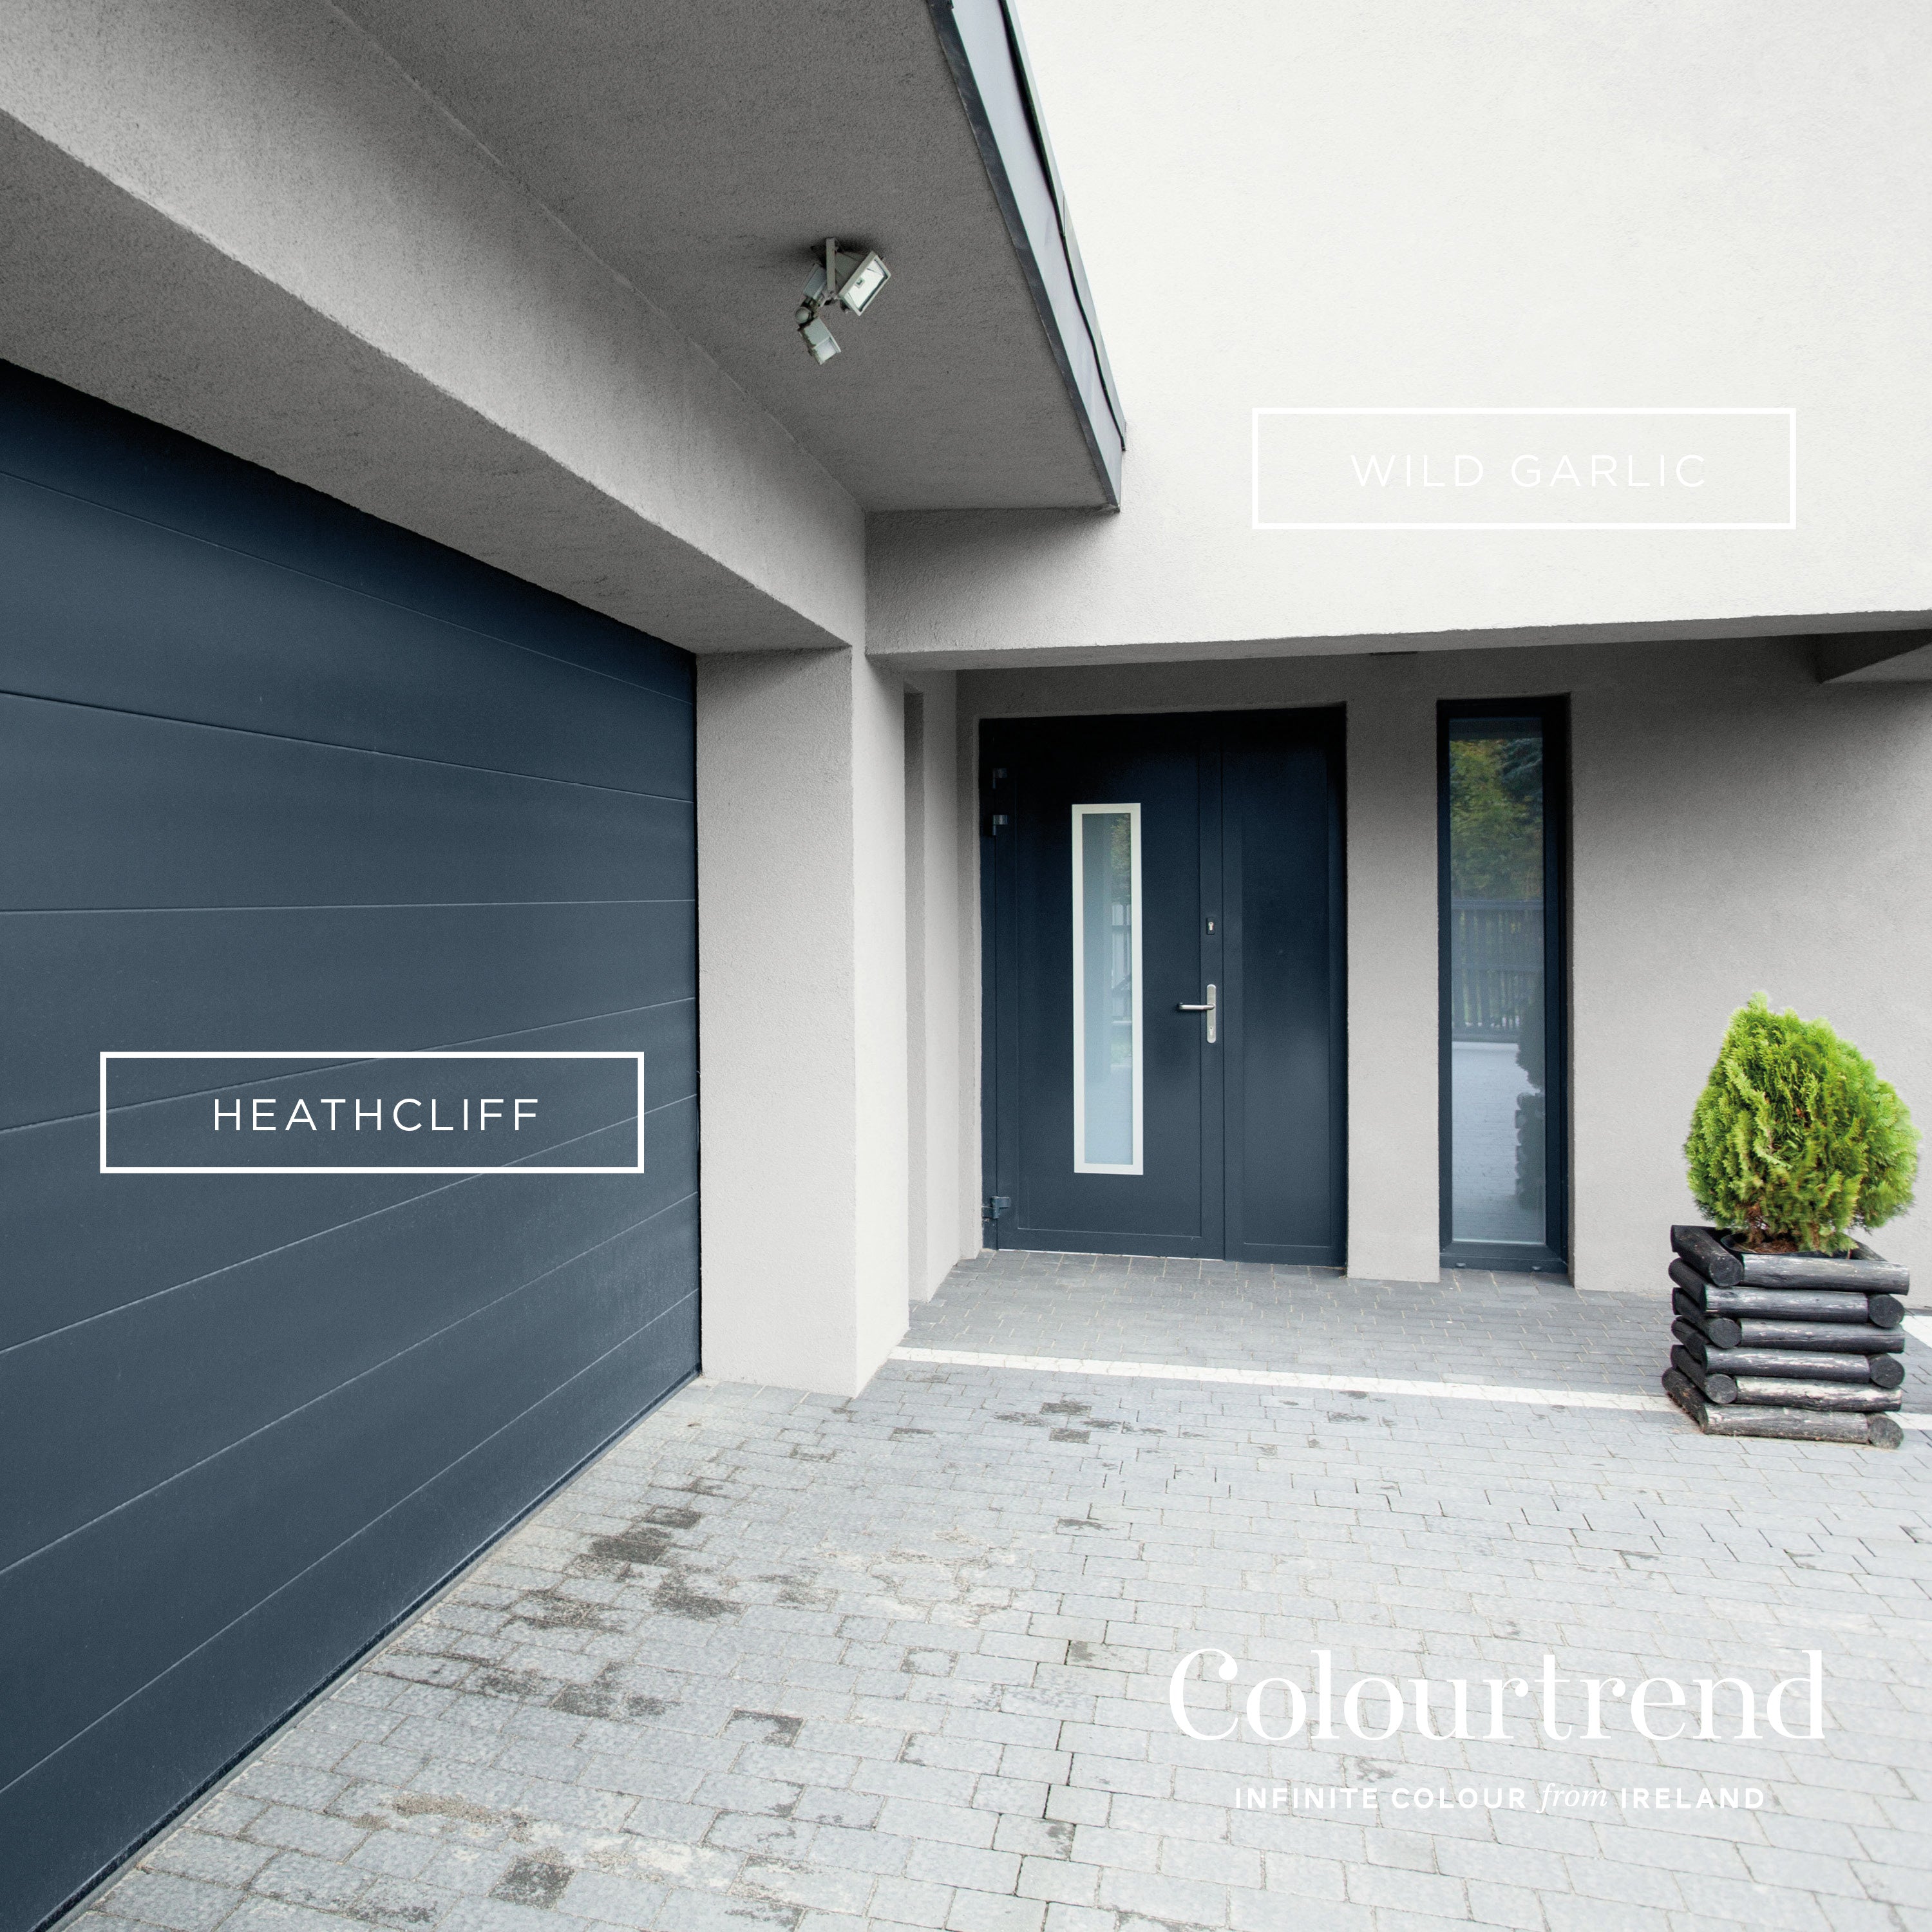 Colourtrend Heathcliff | Same Day Dublin and Nationwide Paint in Ireland Delivery by Weirs of Baggot Street - Official Colourtrend Stockist